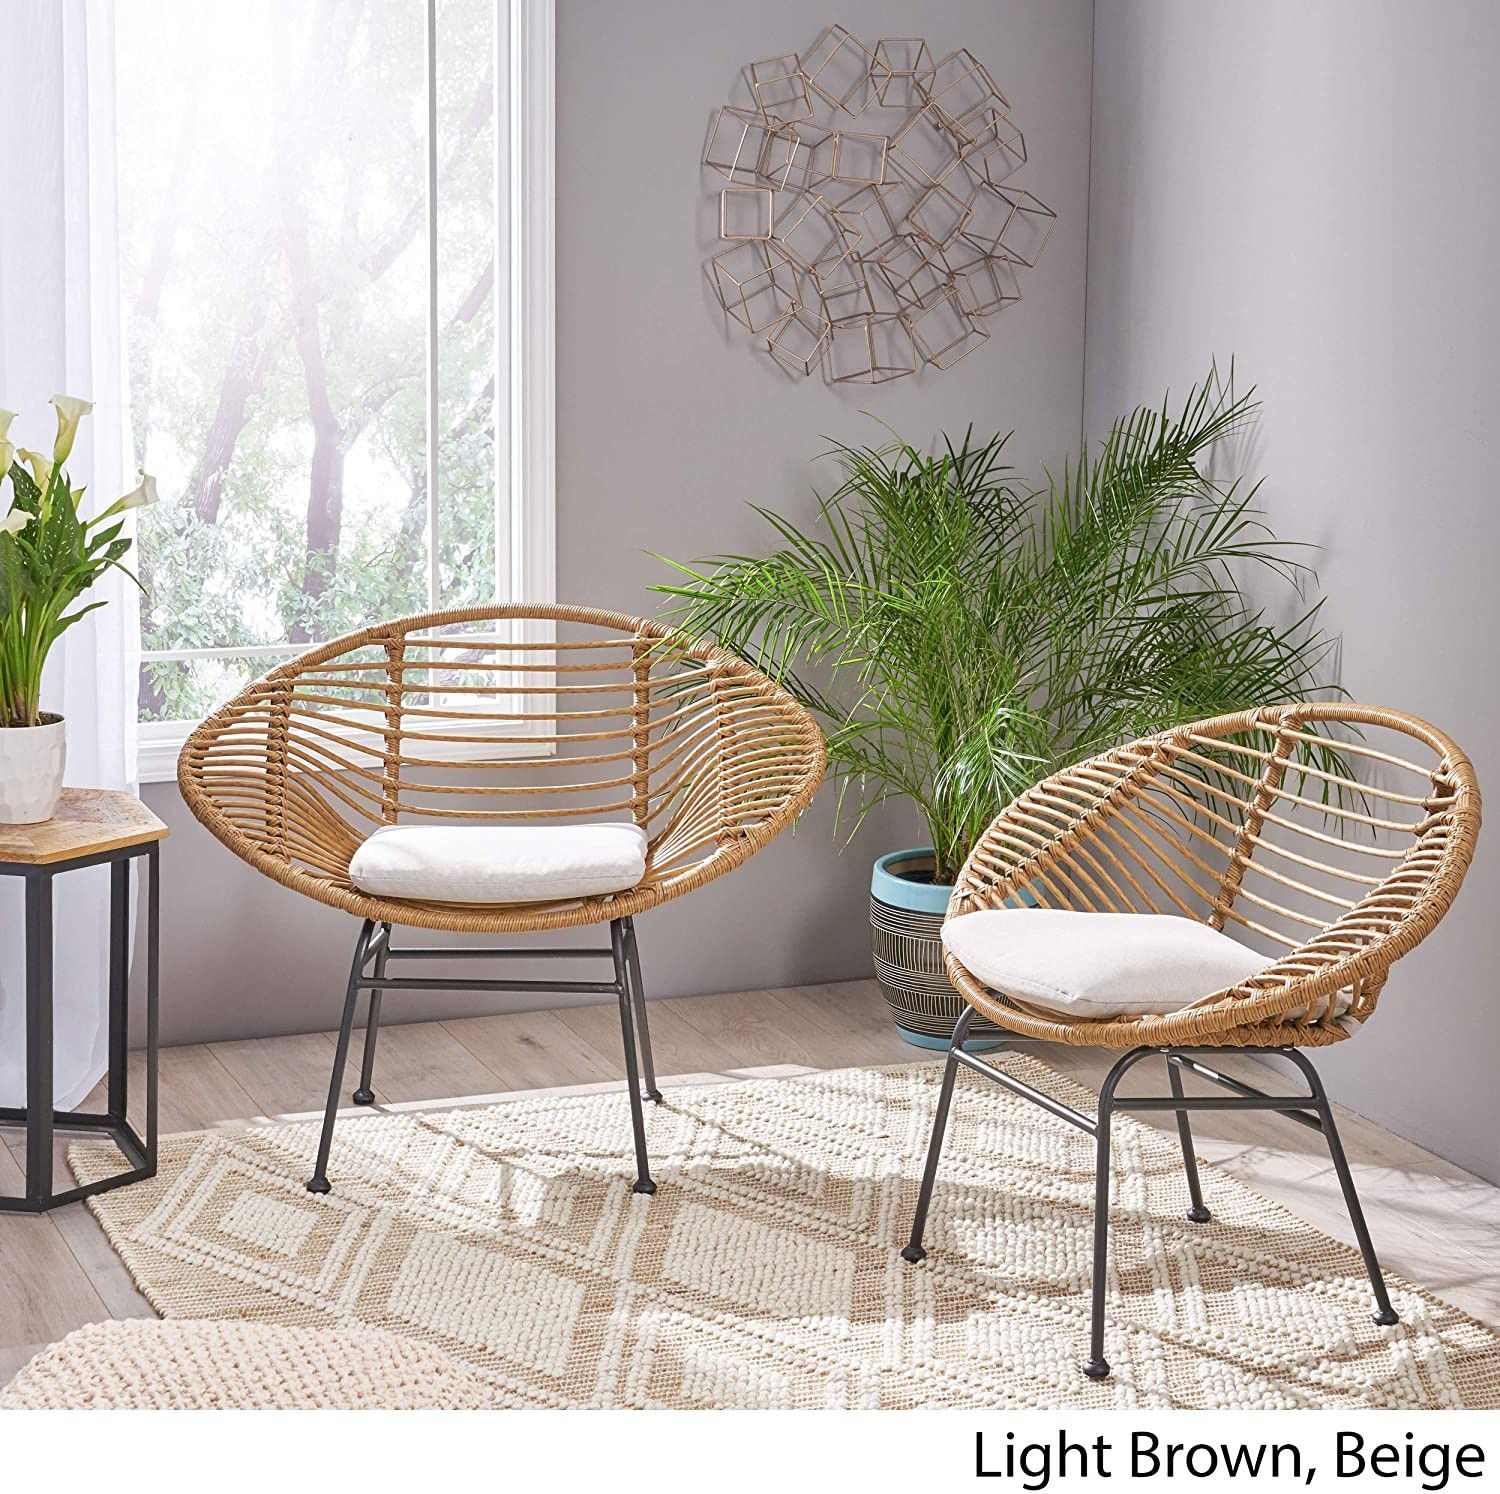 Set of 2 - Modern Woven Rattan Chair with Cushions, Light Brown and Beige